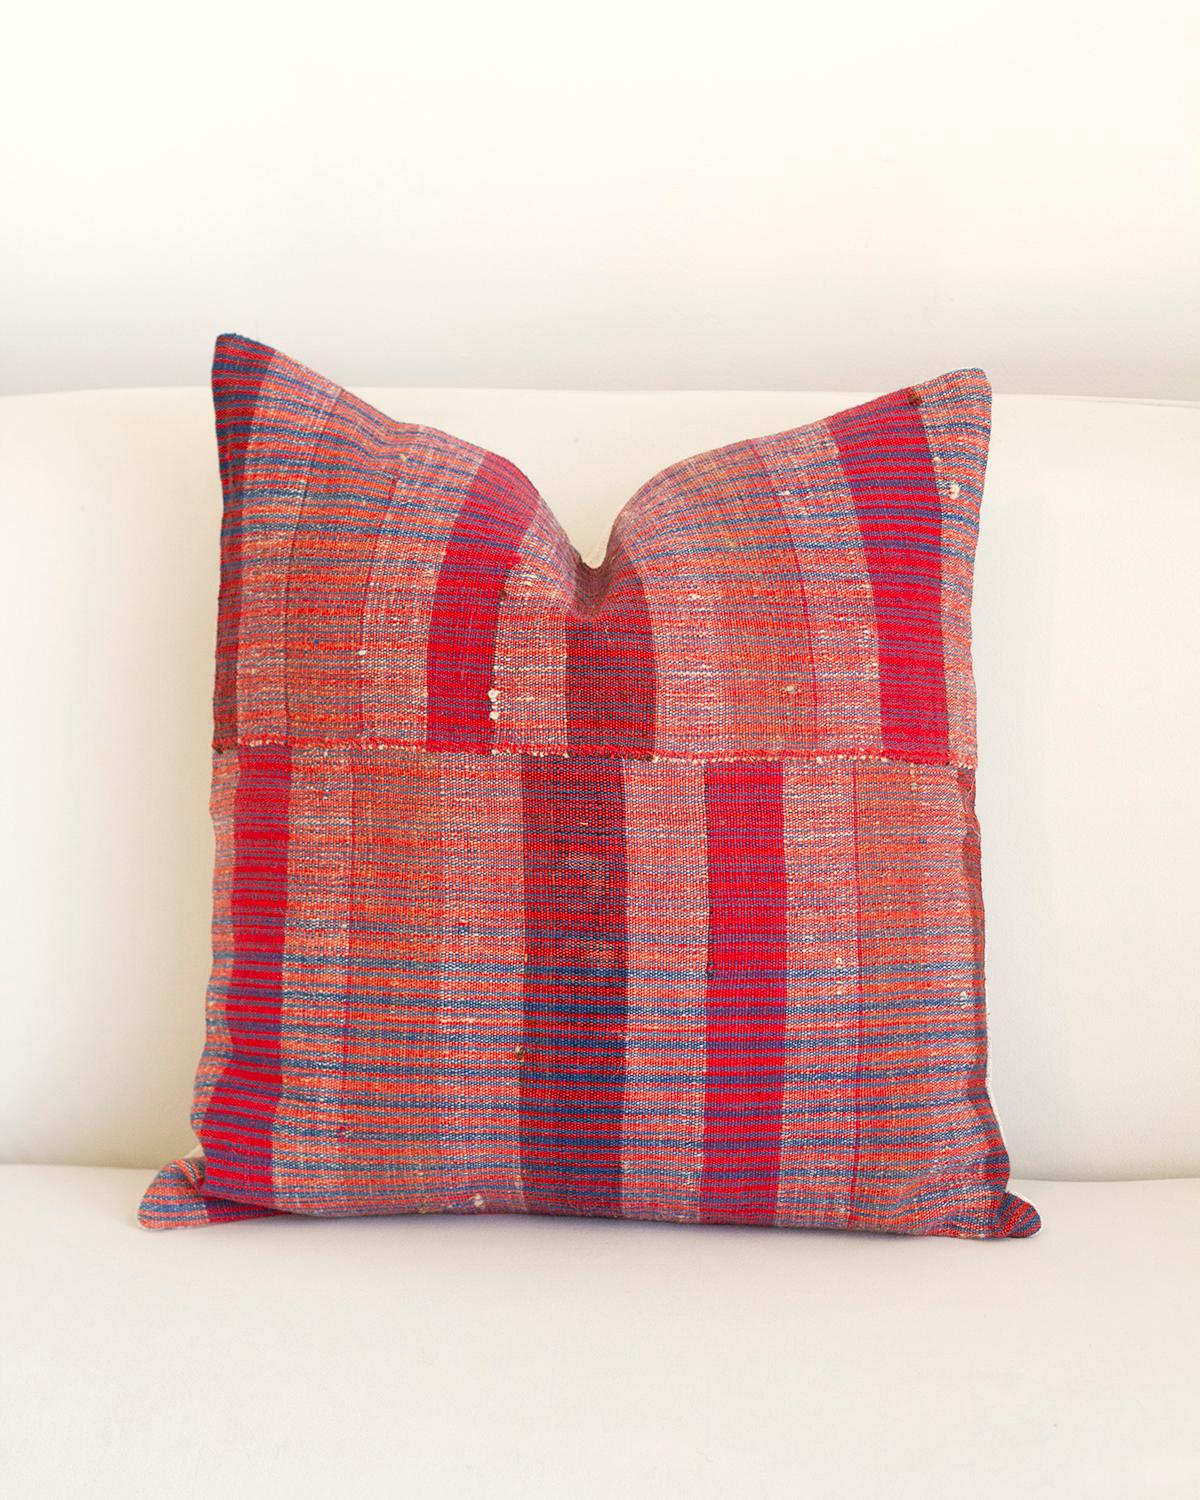 Rustic Matilde Red Striped Checkered Lumbar Throw Pillow made from Vintage Linen For Sale